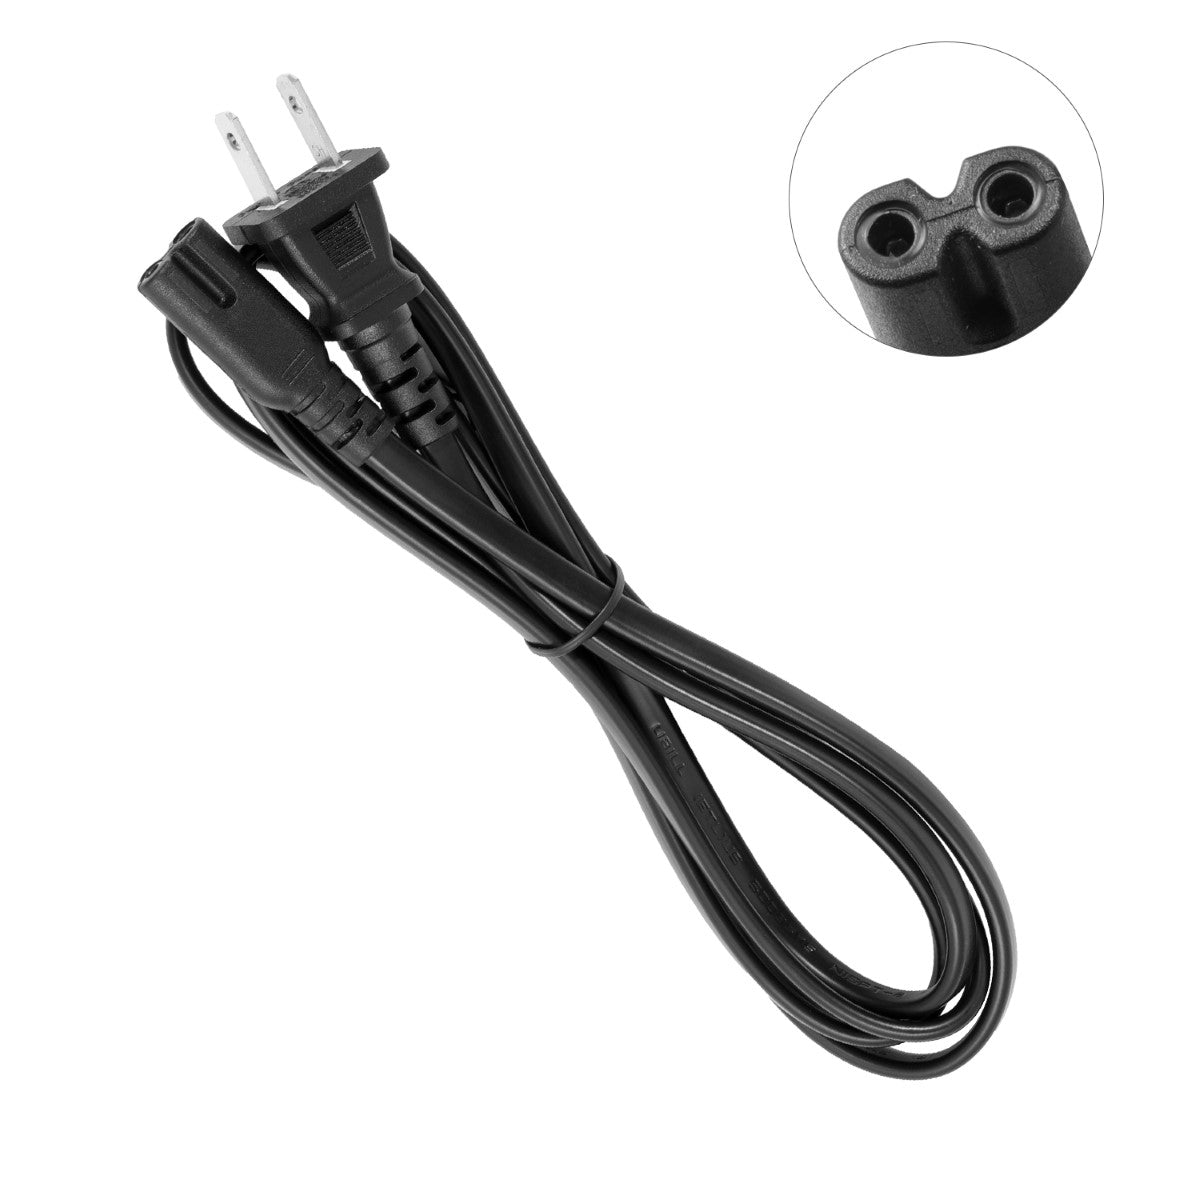 Power Cord for Canon MAXIFY MB2120 Printer.